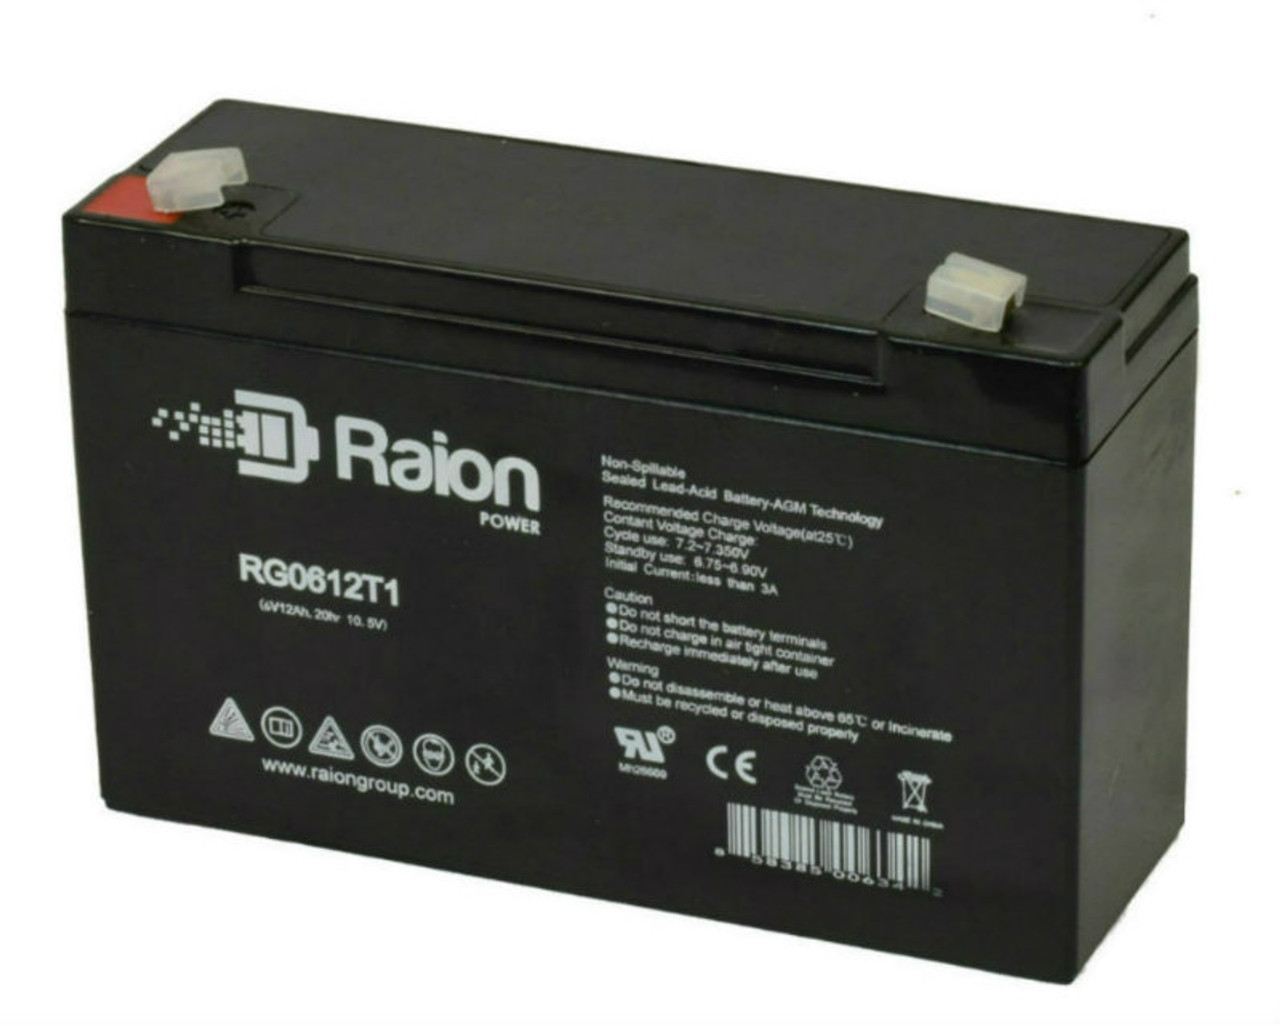 Raion Power RG06120T1 Replacement Battery for Zeus PC12-6F1